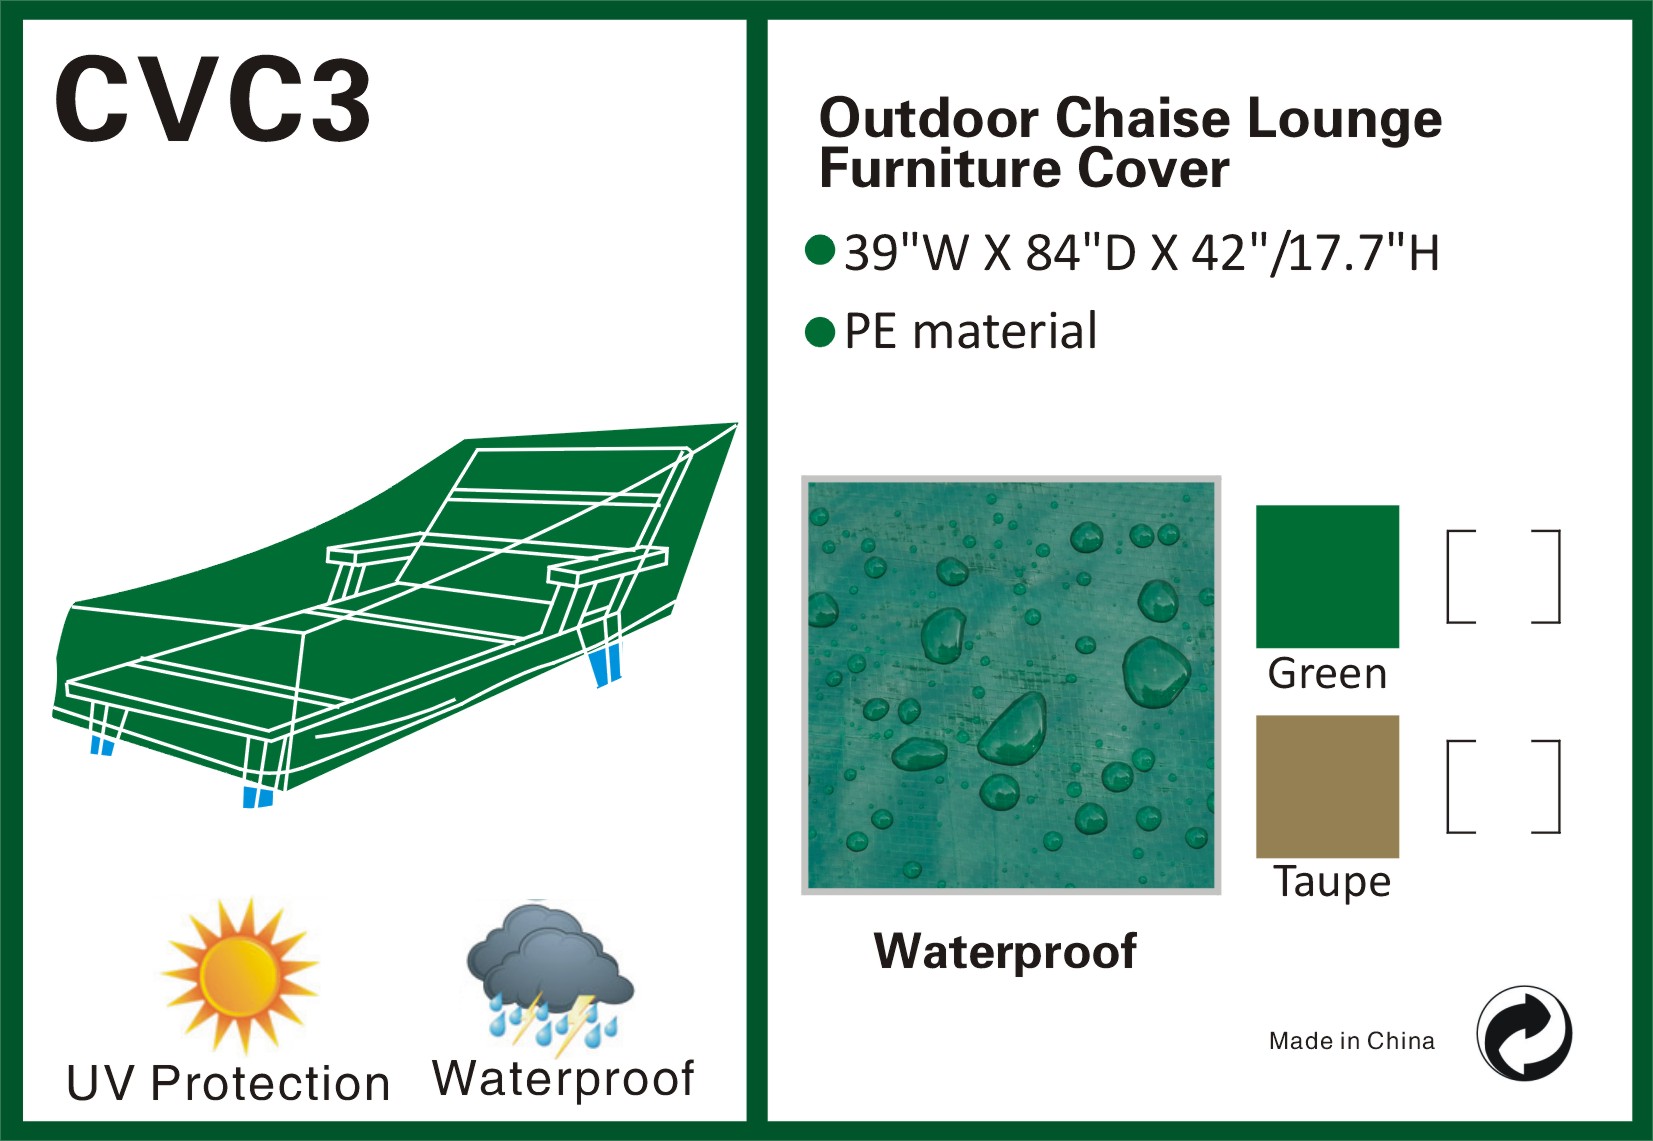 Sunrise Outdoor Patio Garden Chaise Lounge Chair Protector, Furniture Cover, Green - image 2 of 3